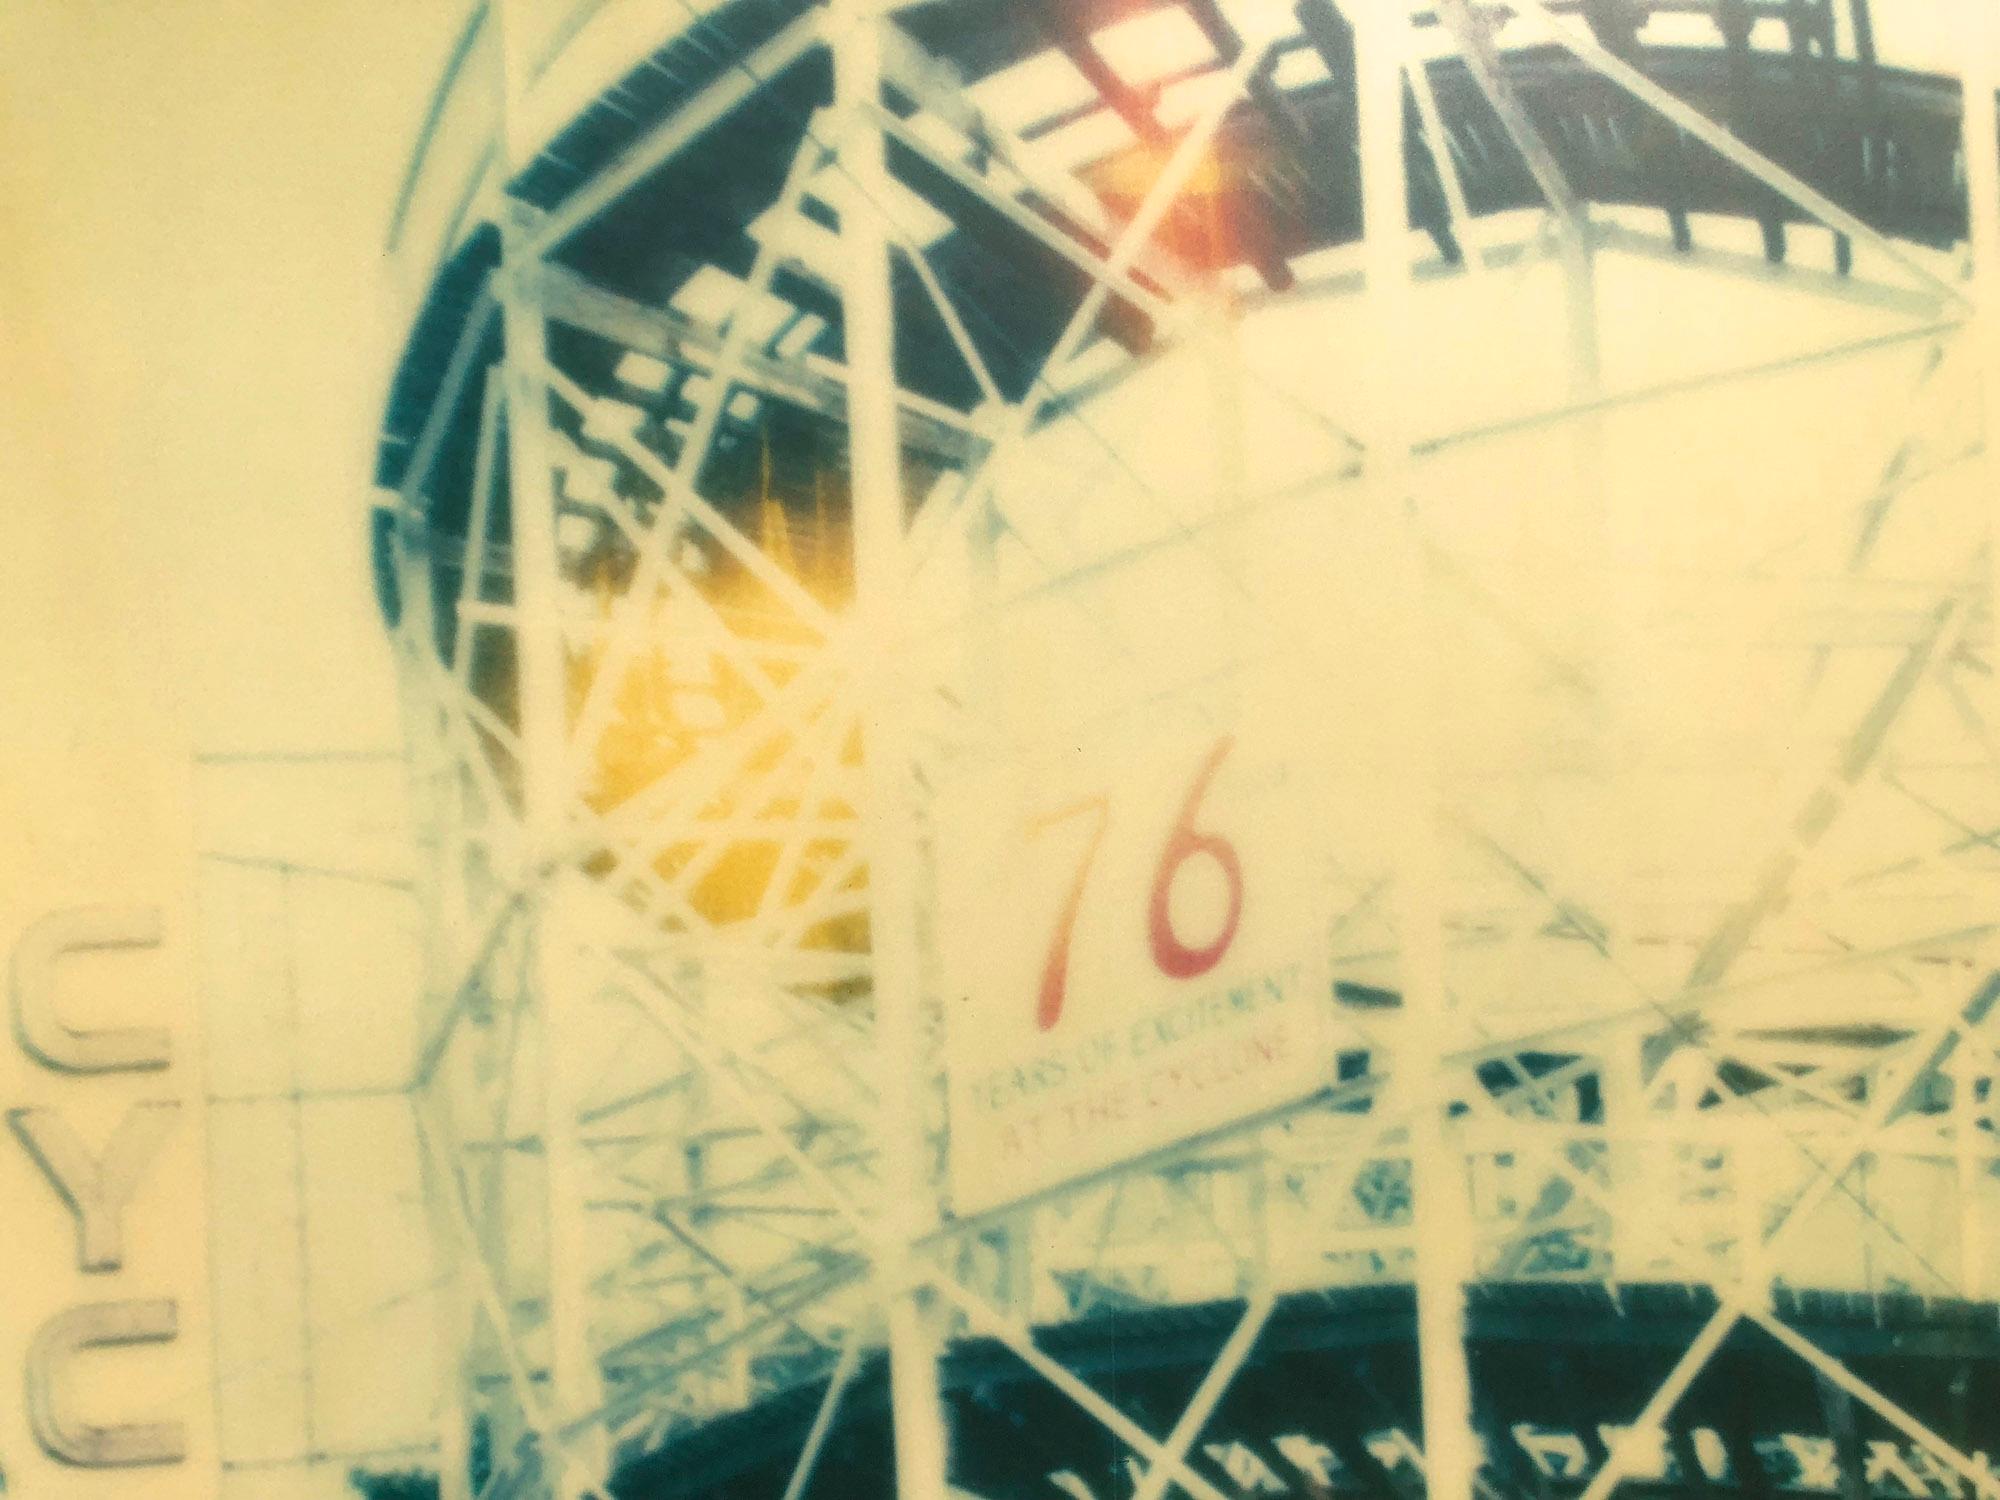 Cyclone (Stay) - Coney Island, 21 Century, Contemporary, Icons, Landscape - Photograph by Stefanie Schneider